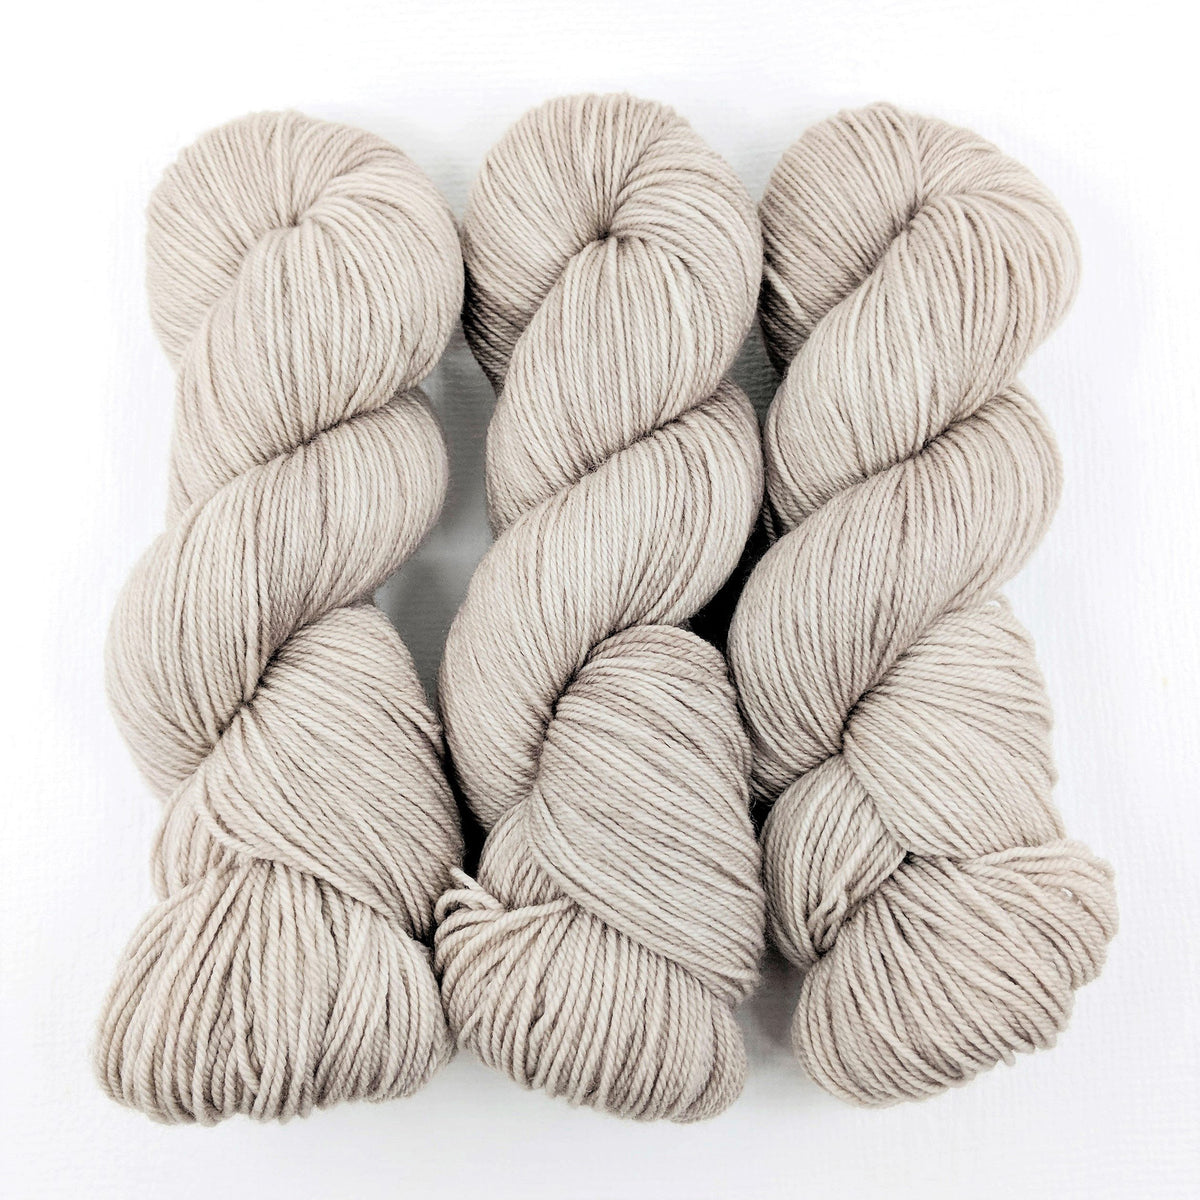 The Softer Side of Linen - Revival Worsted - Dyed Stock